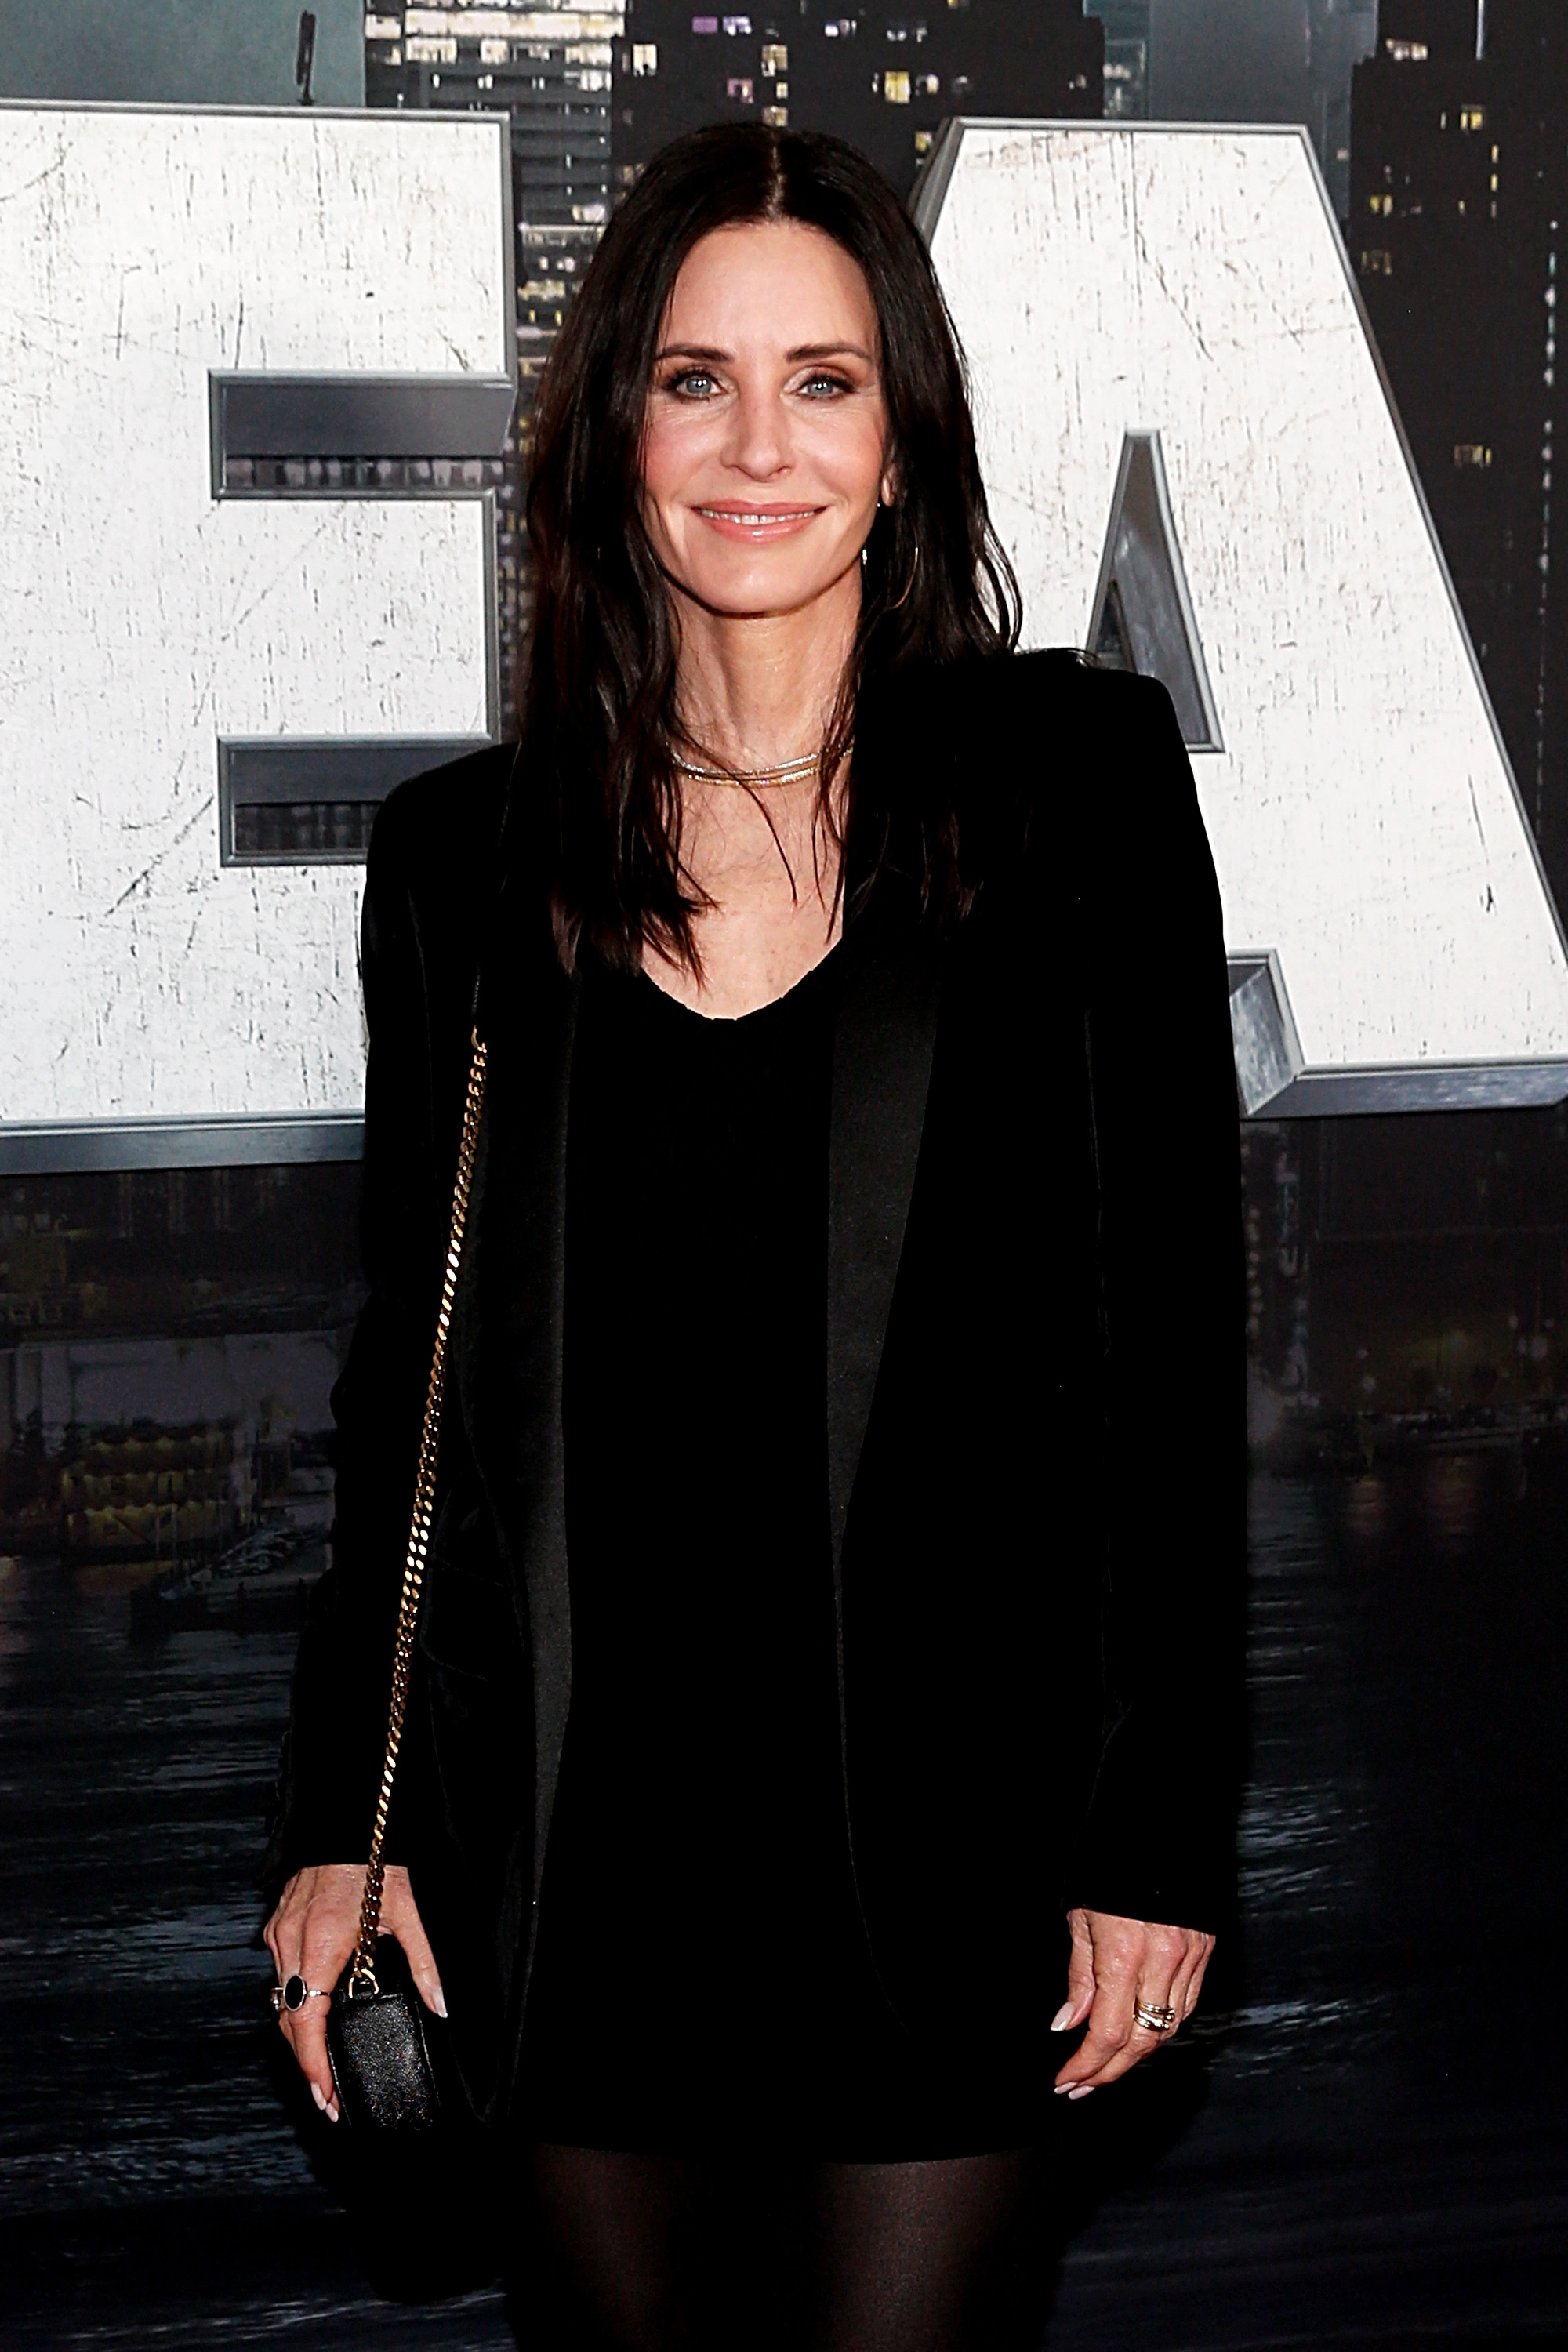 Courteney standing before a &quot;Z&quot; sign, wearing a black blazer over a sheer top, smiling